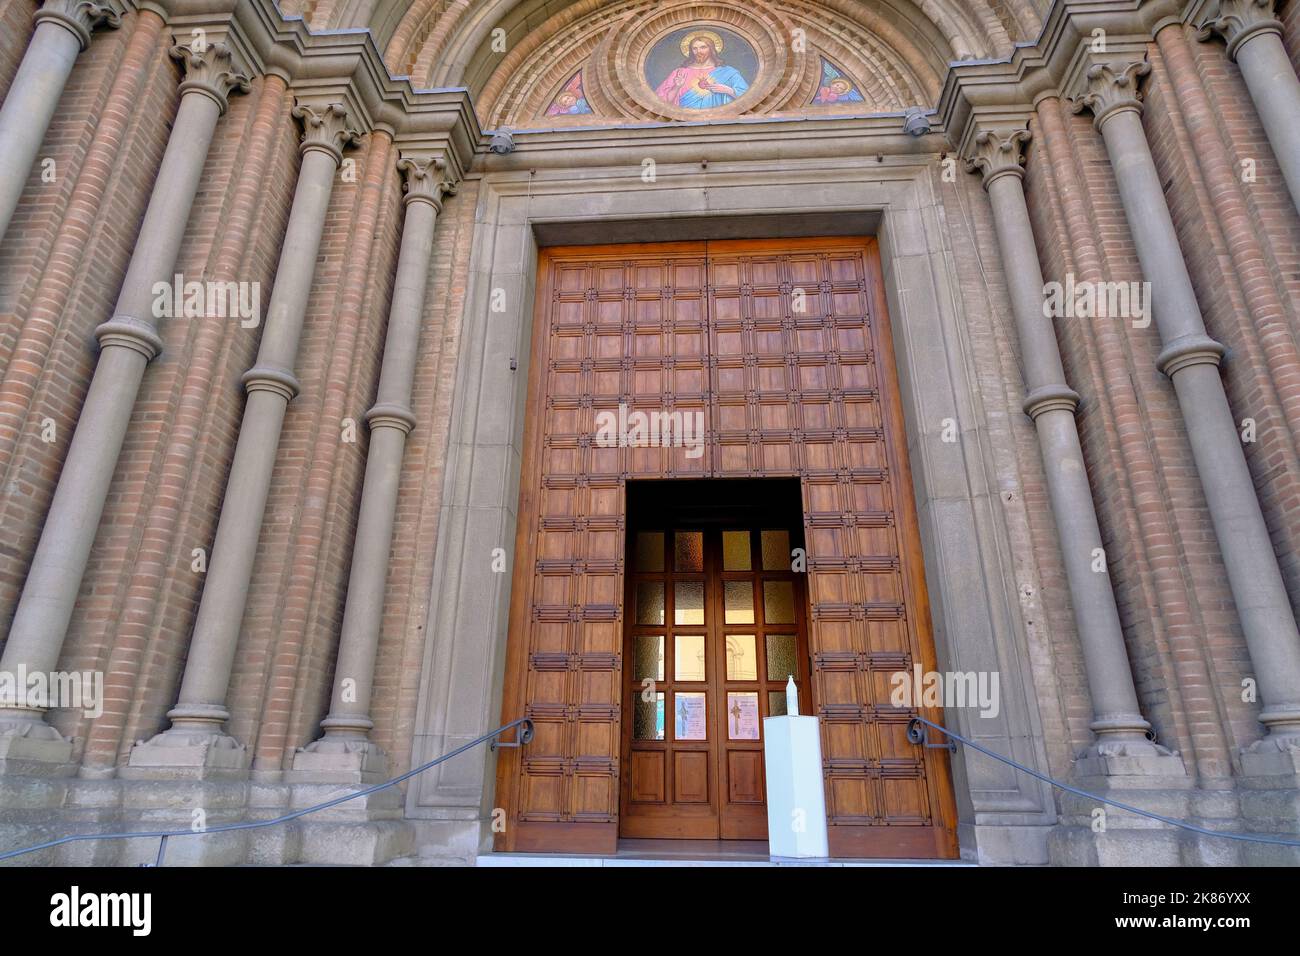 Facade and doors of the Church of the Sacred Heart of Jesus (Parrocchia Sacro Cuore Gesu') in Bologna, Italy. Religious architecture Stock Photo